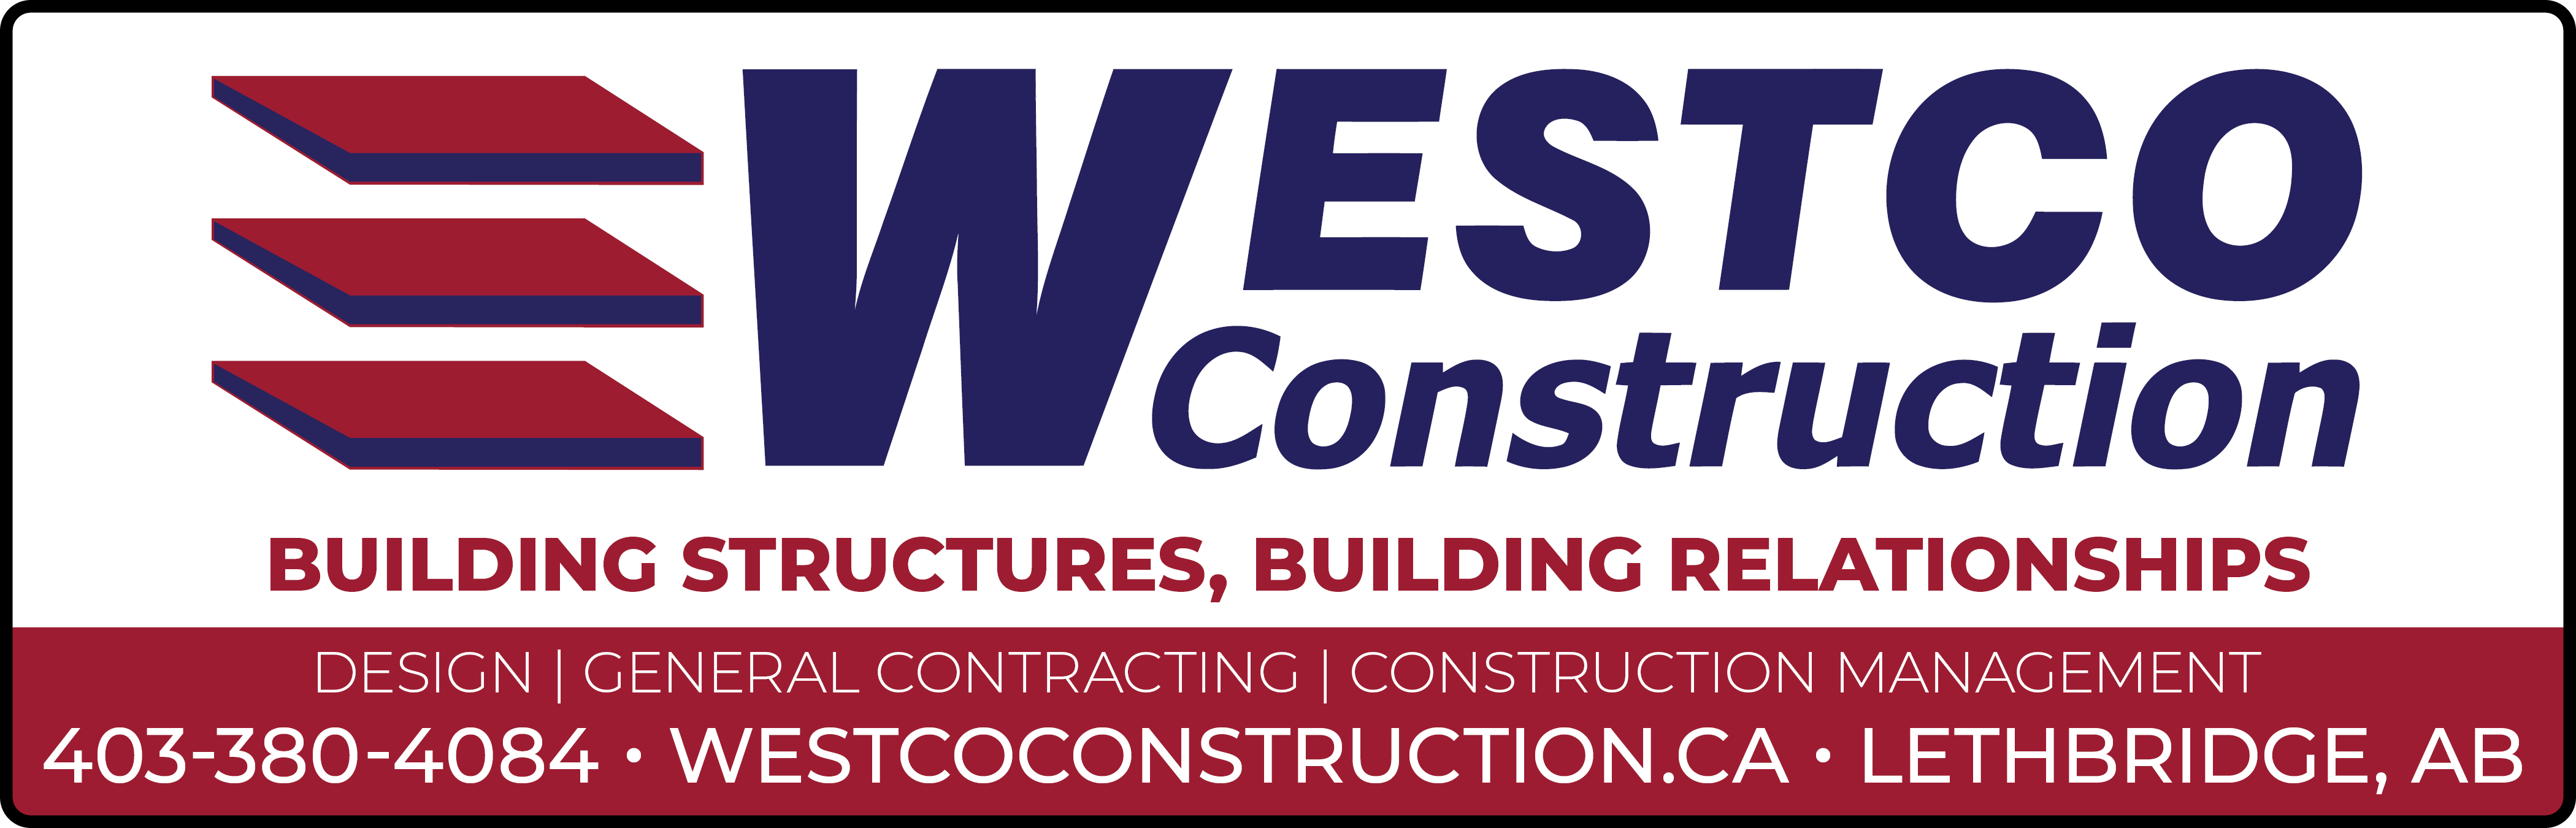 Westco Construction Limited